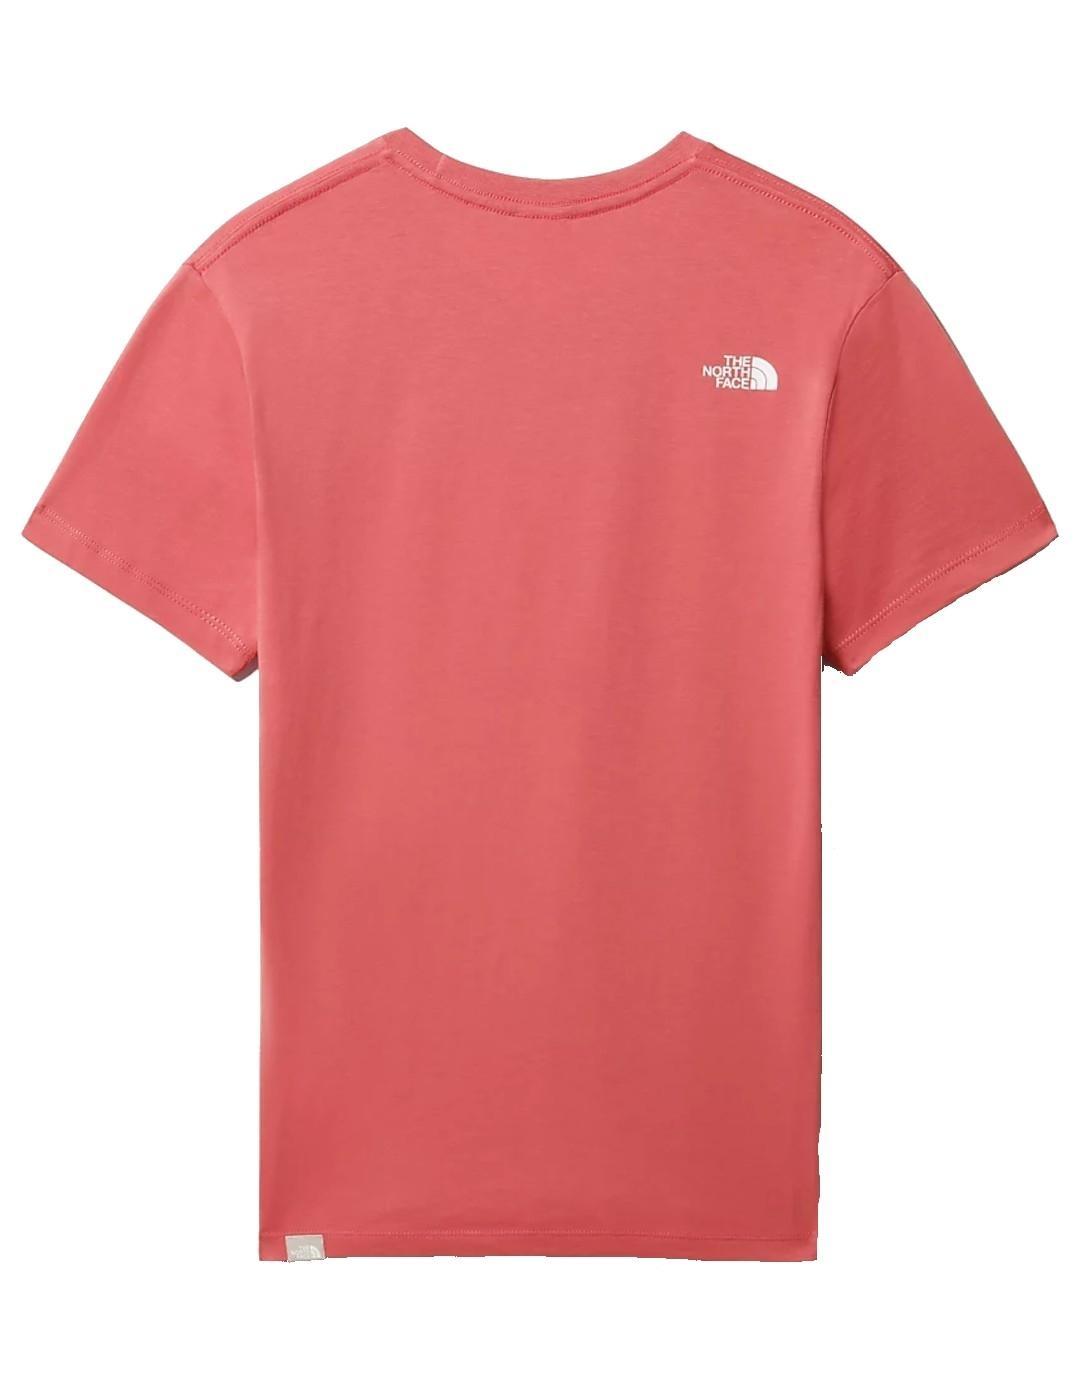 Camiseta Mujer The North Face Simple Dome Coral